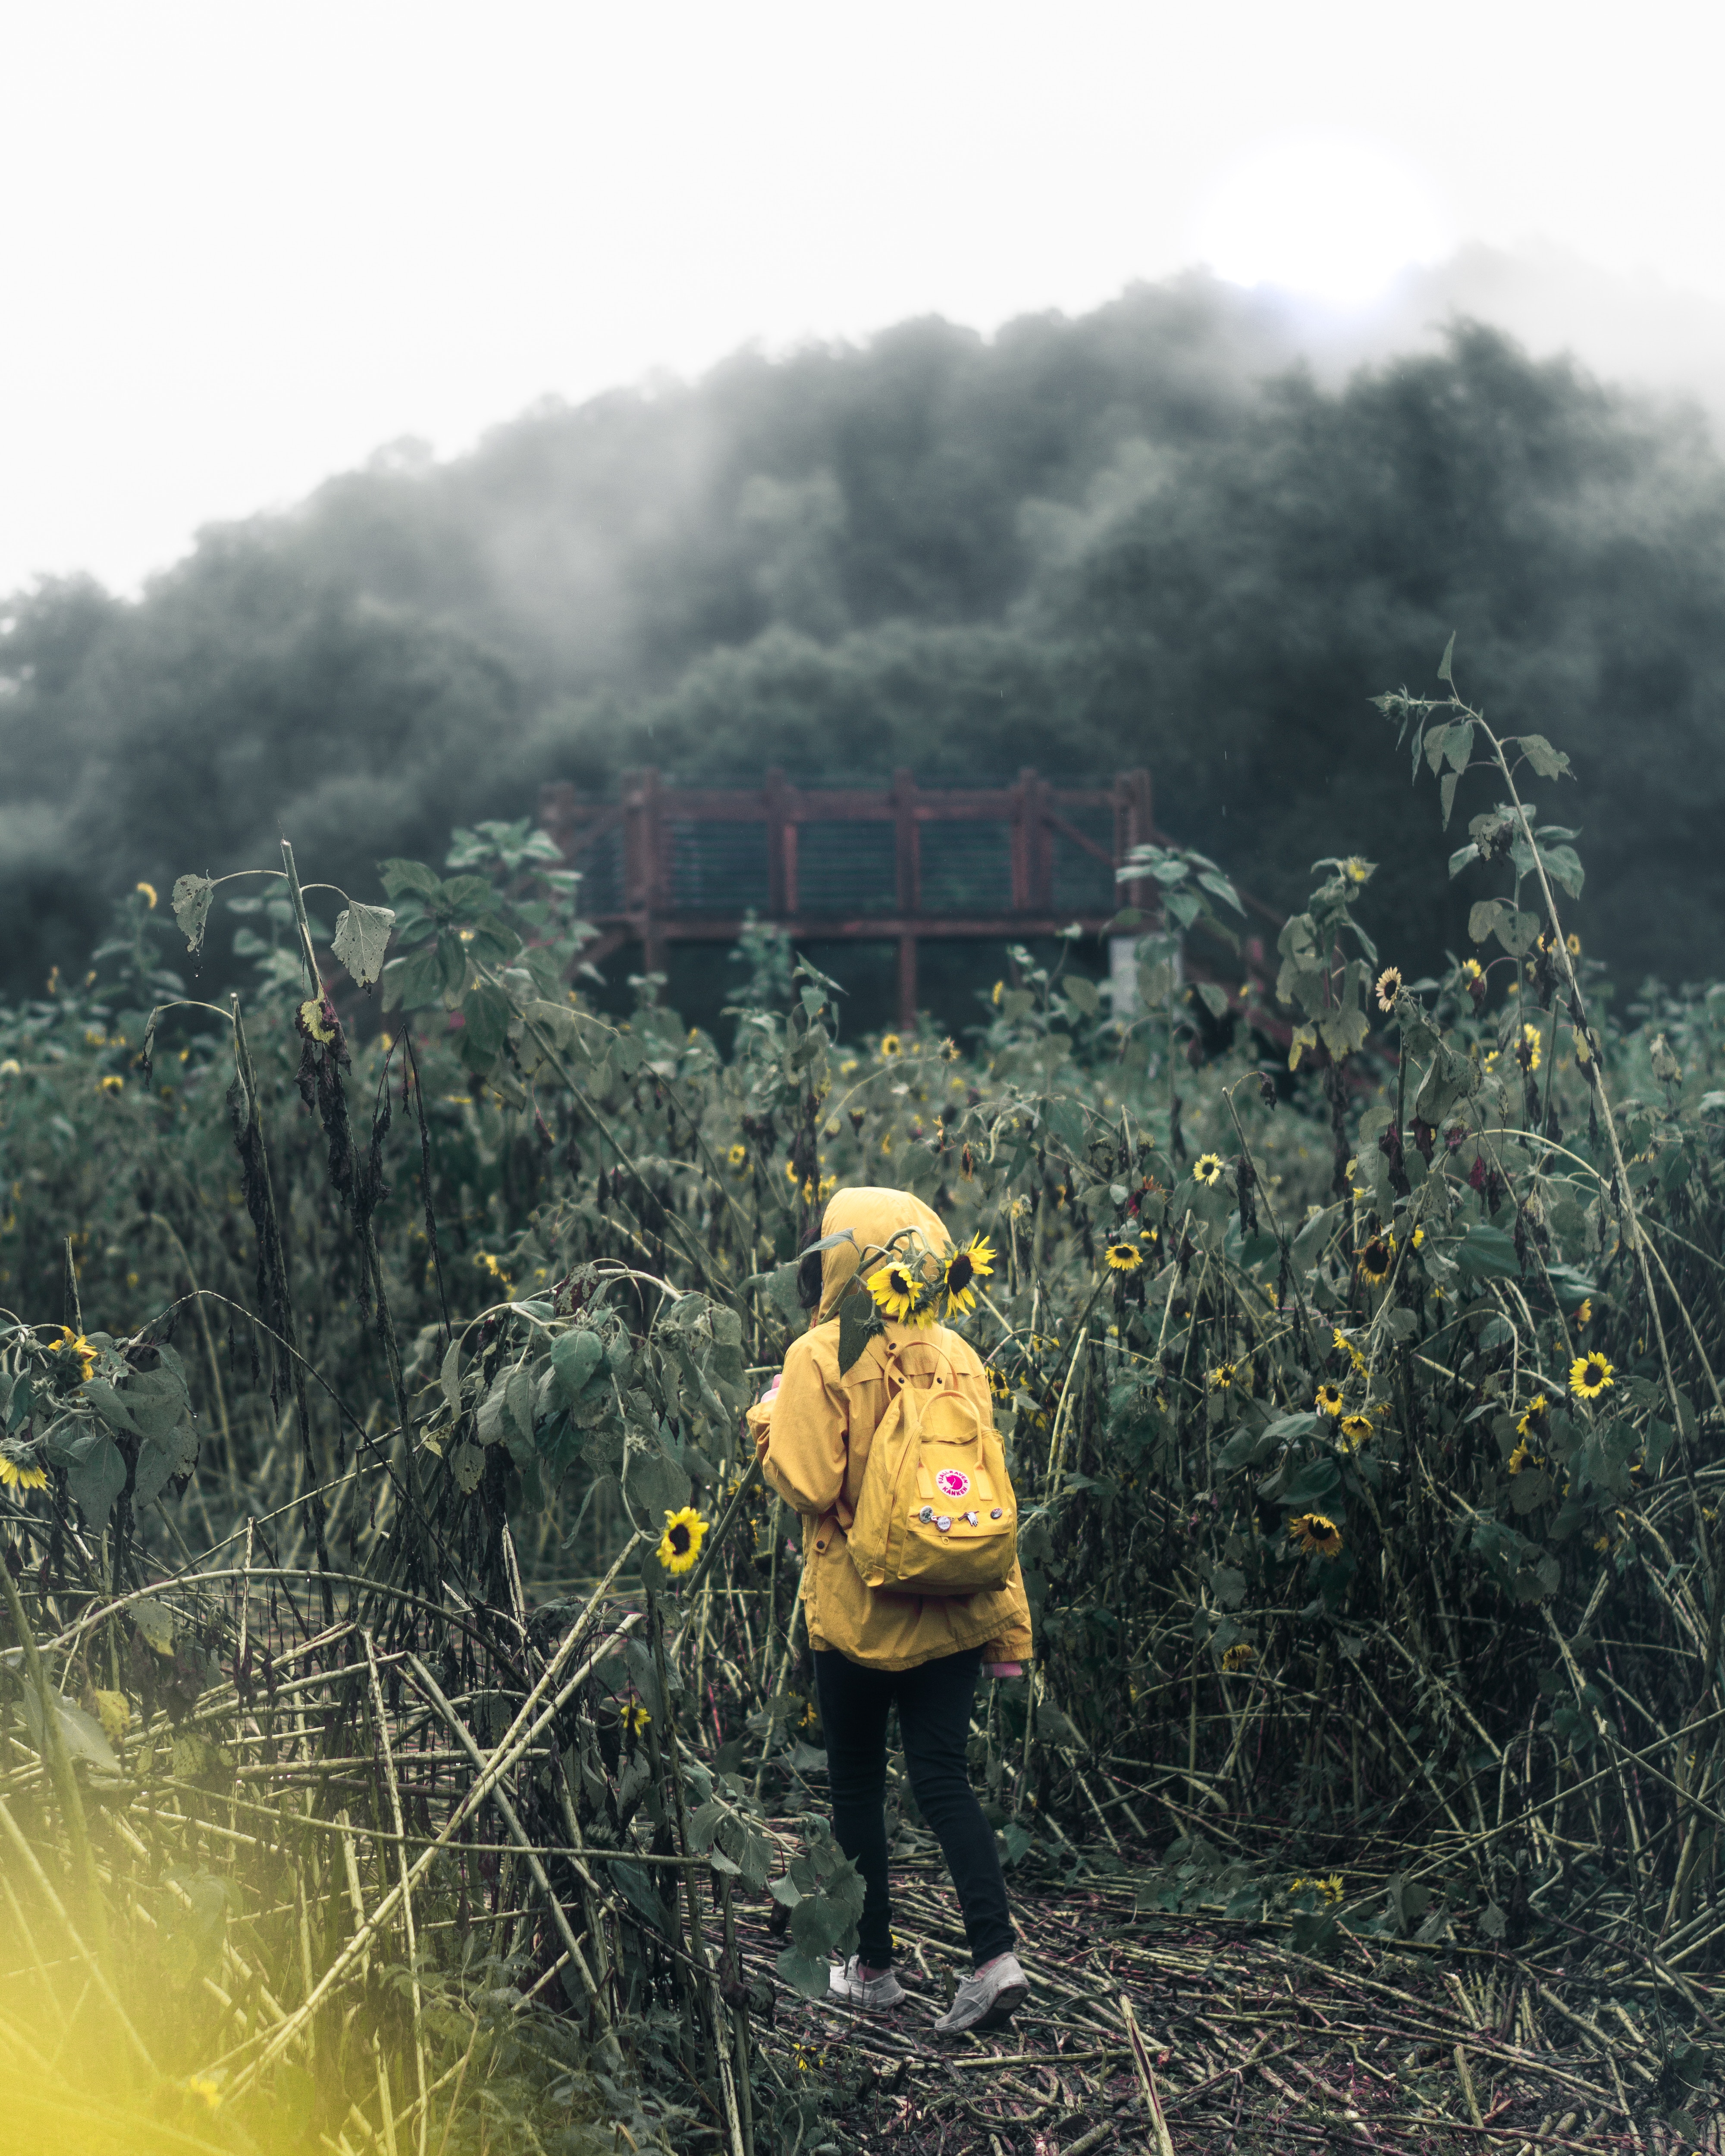 nature, flowers, clouds, field, human, person, mainly cloudy, overcast, backpack, rucksack